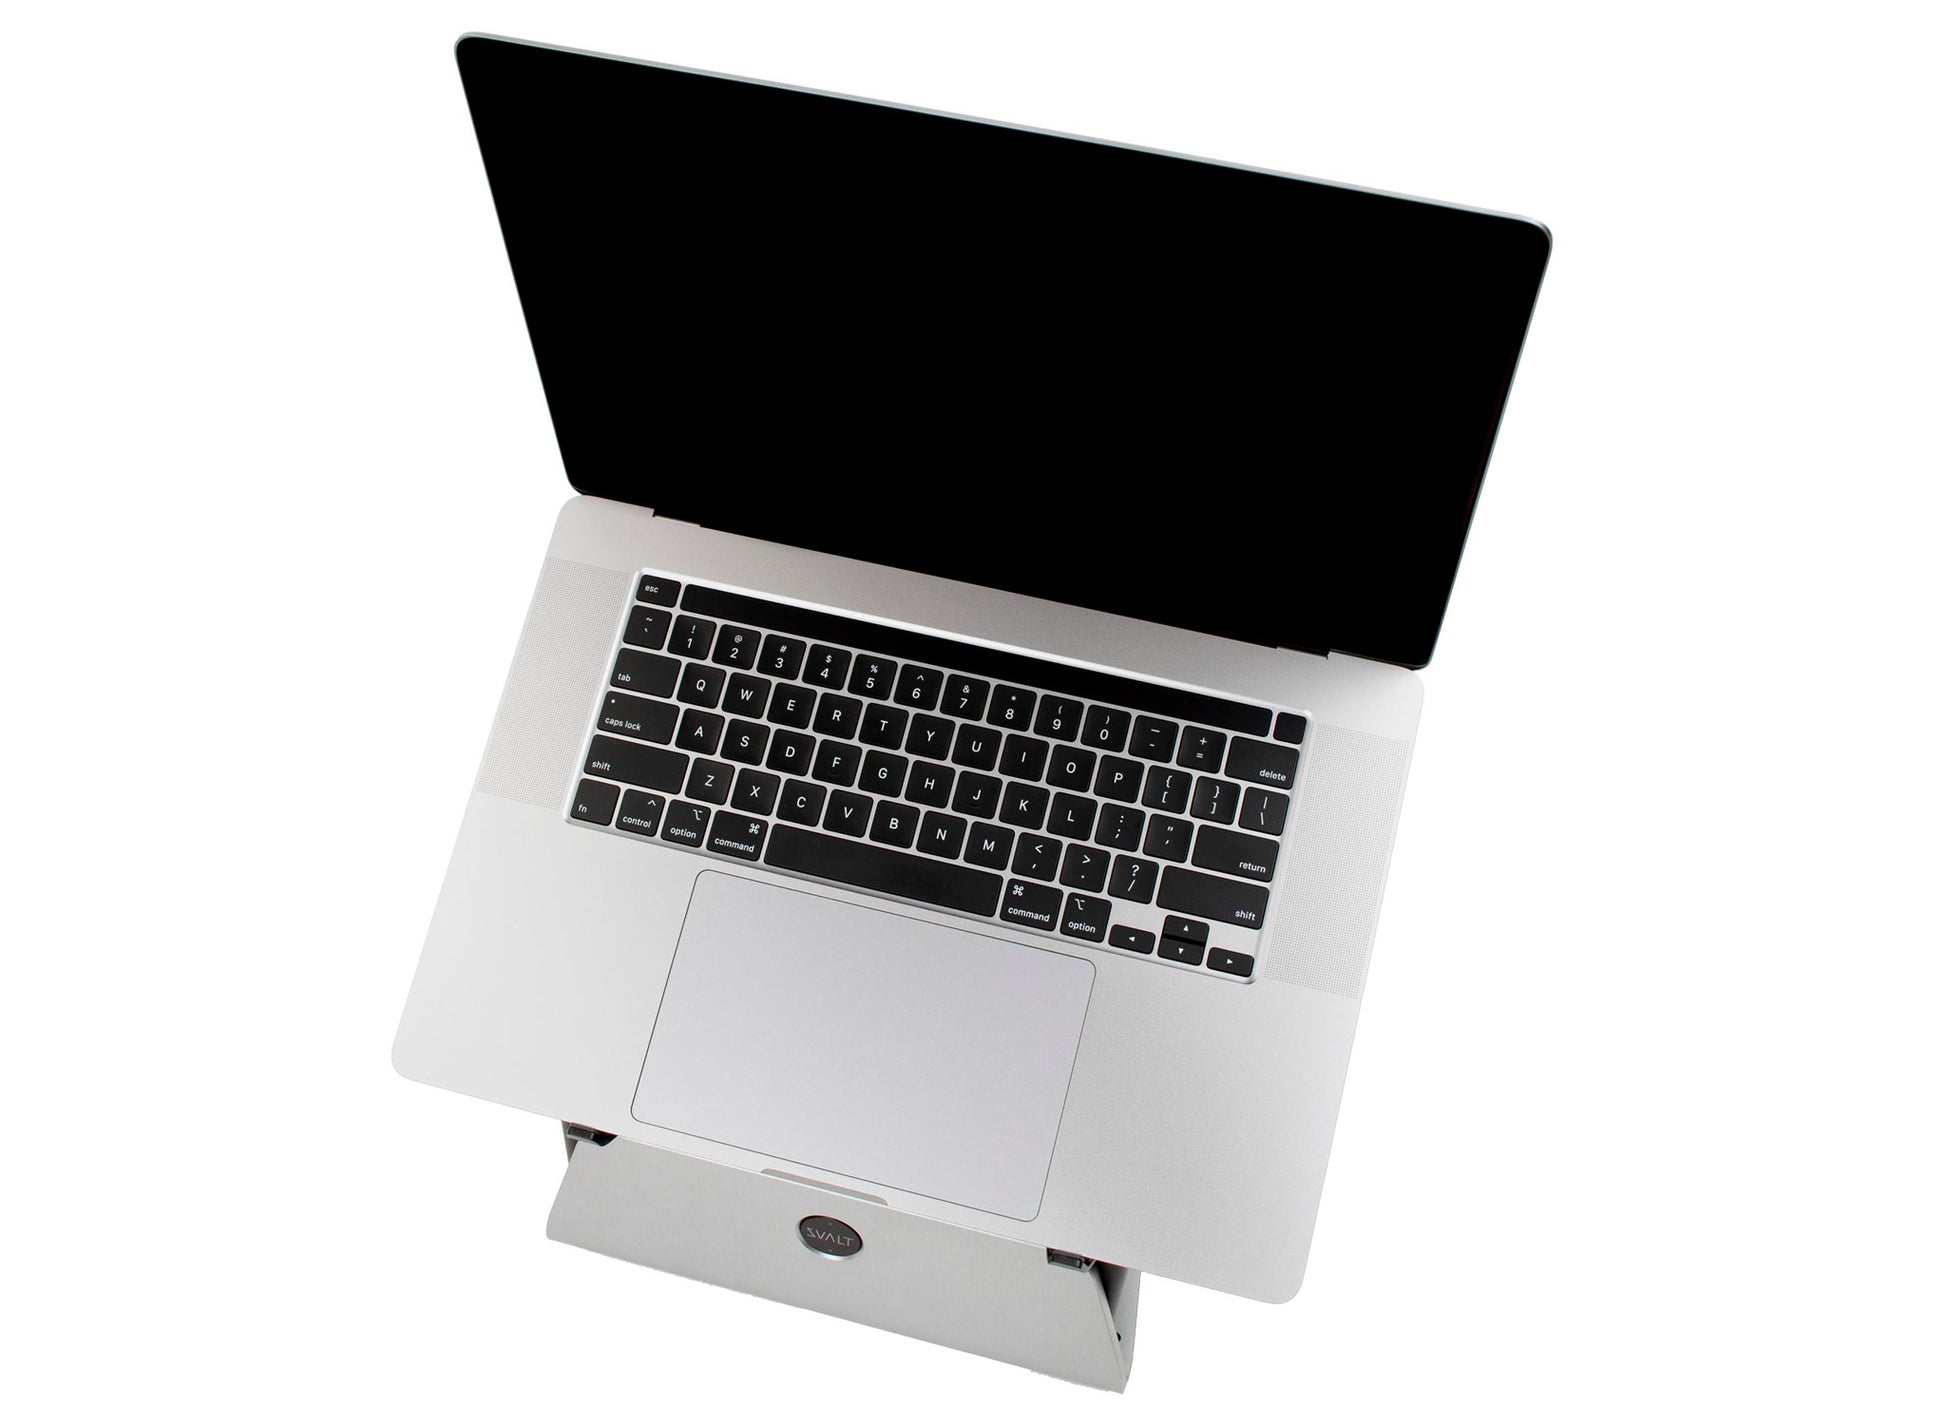 SVALT Cooling Stand model SxG17 gray front top side view for quiet fan cooling performance with Apple laptop 16-inch MacBook Pro